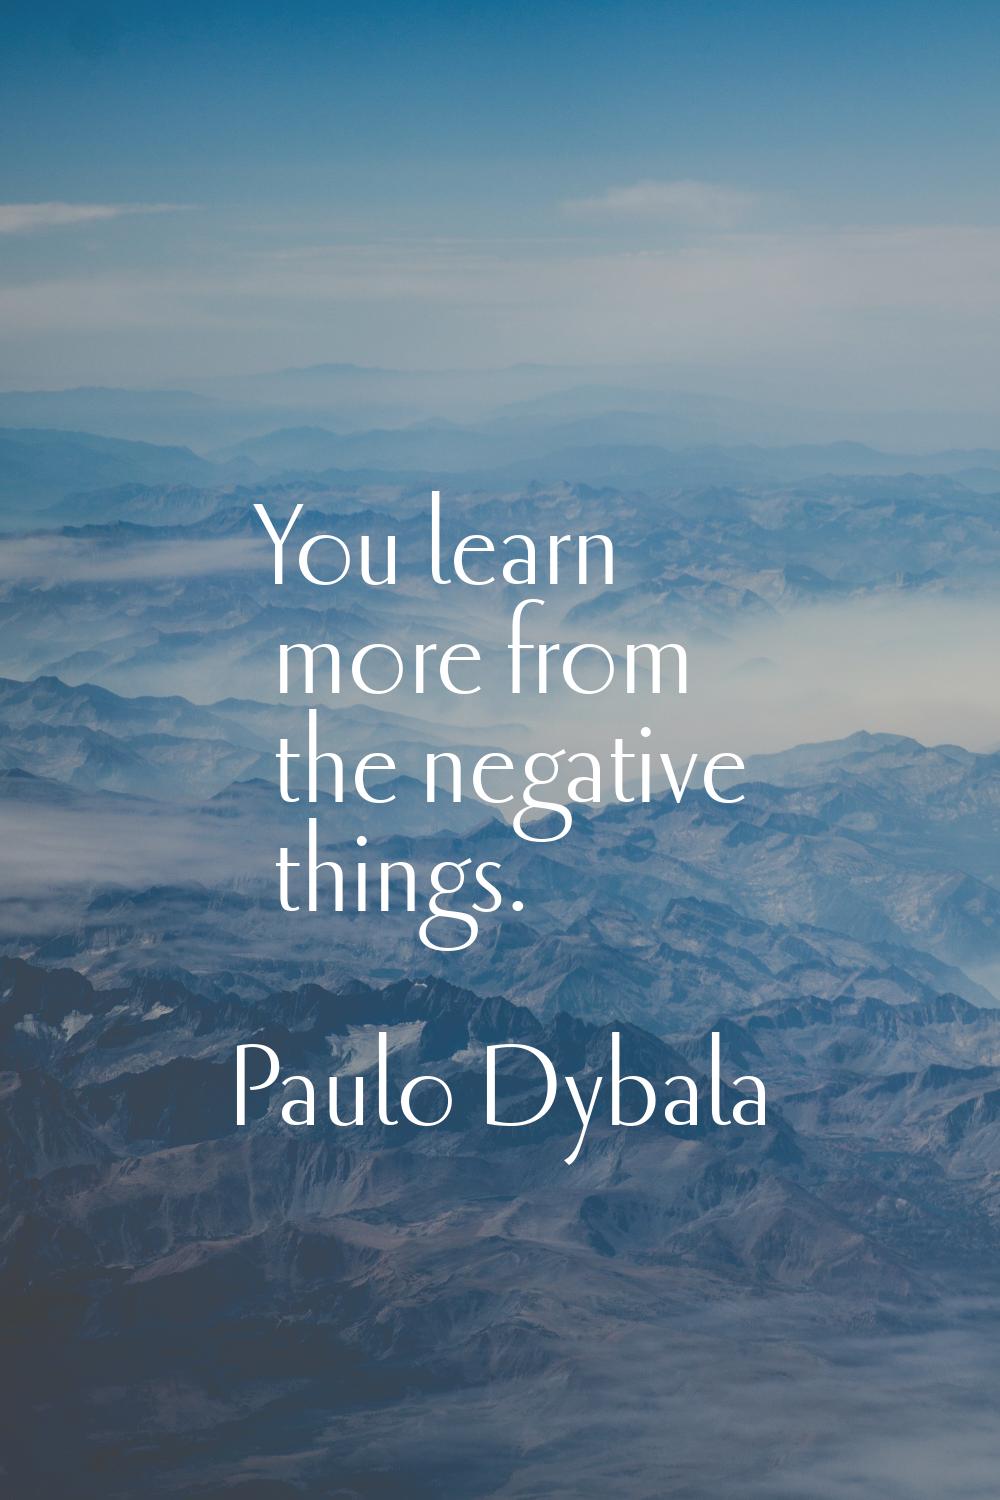 You learn more from the negative things.